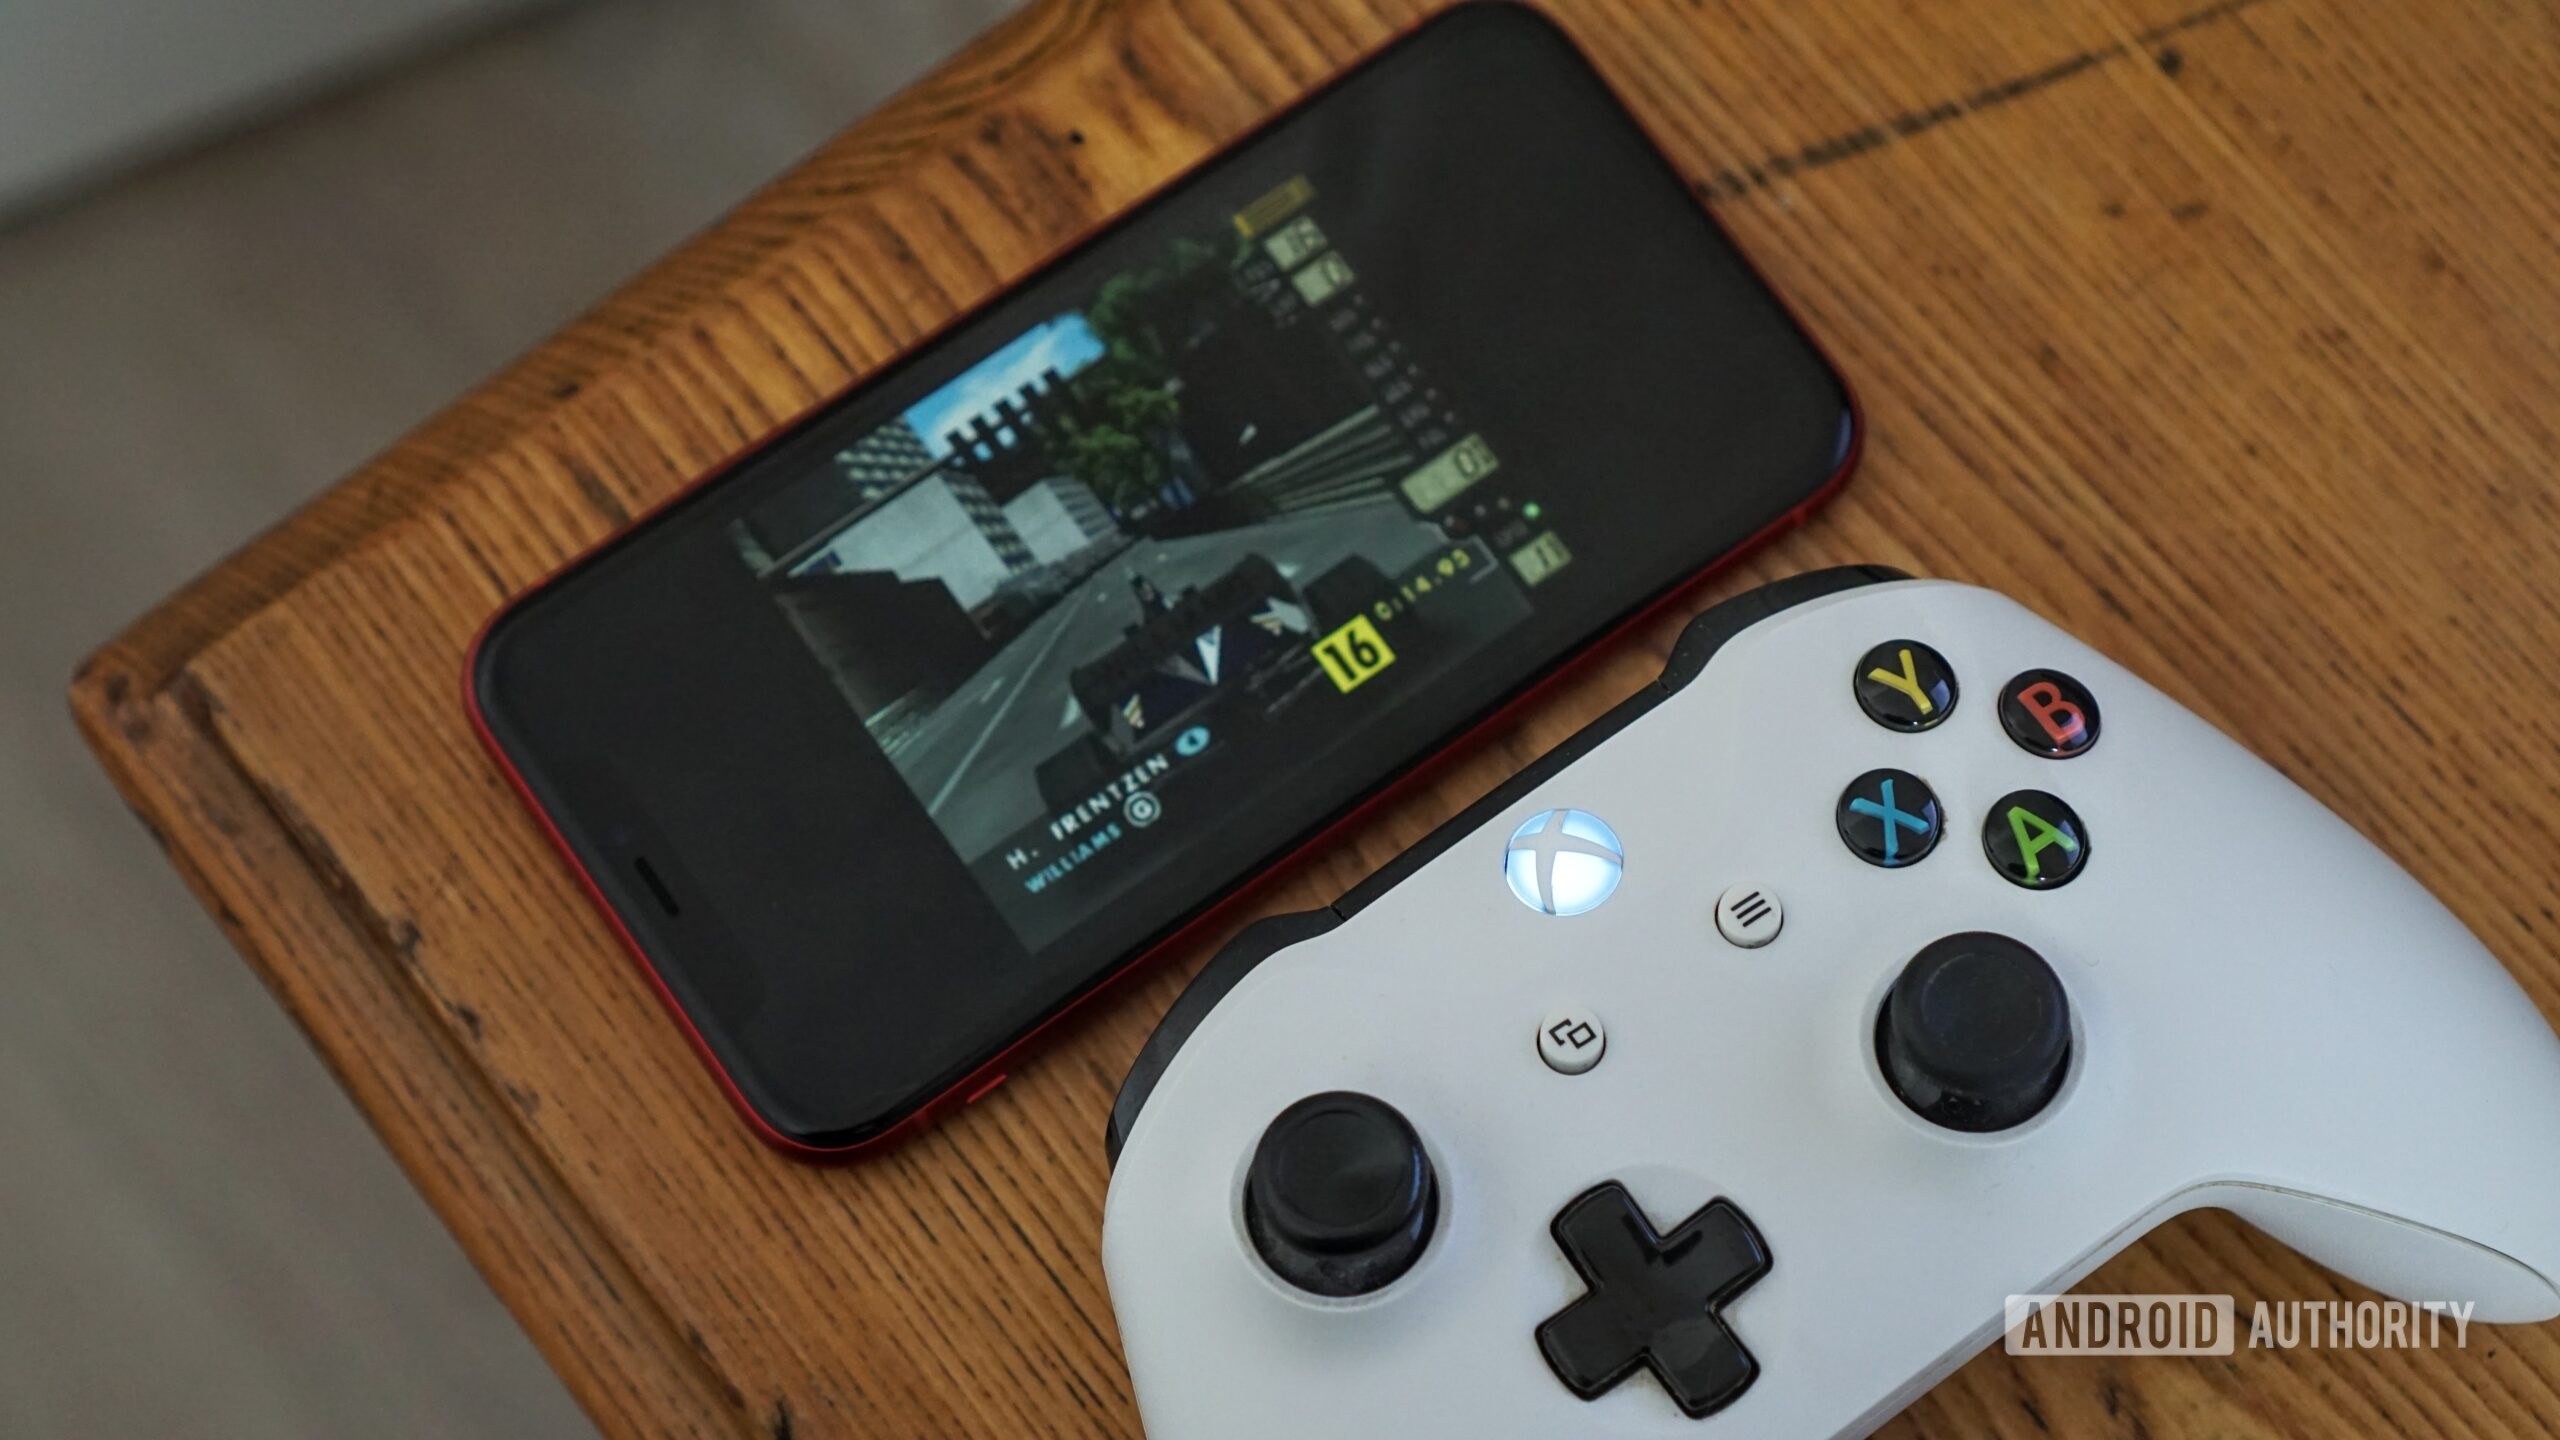 Delta for iOS with Xbox controller